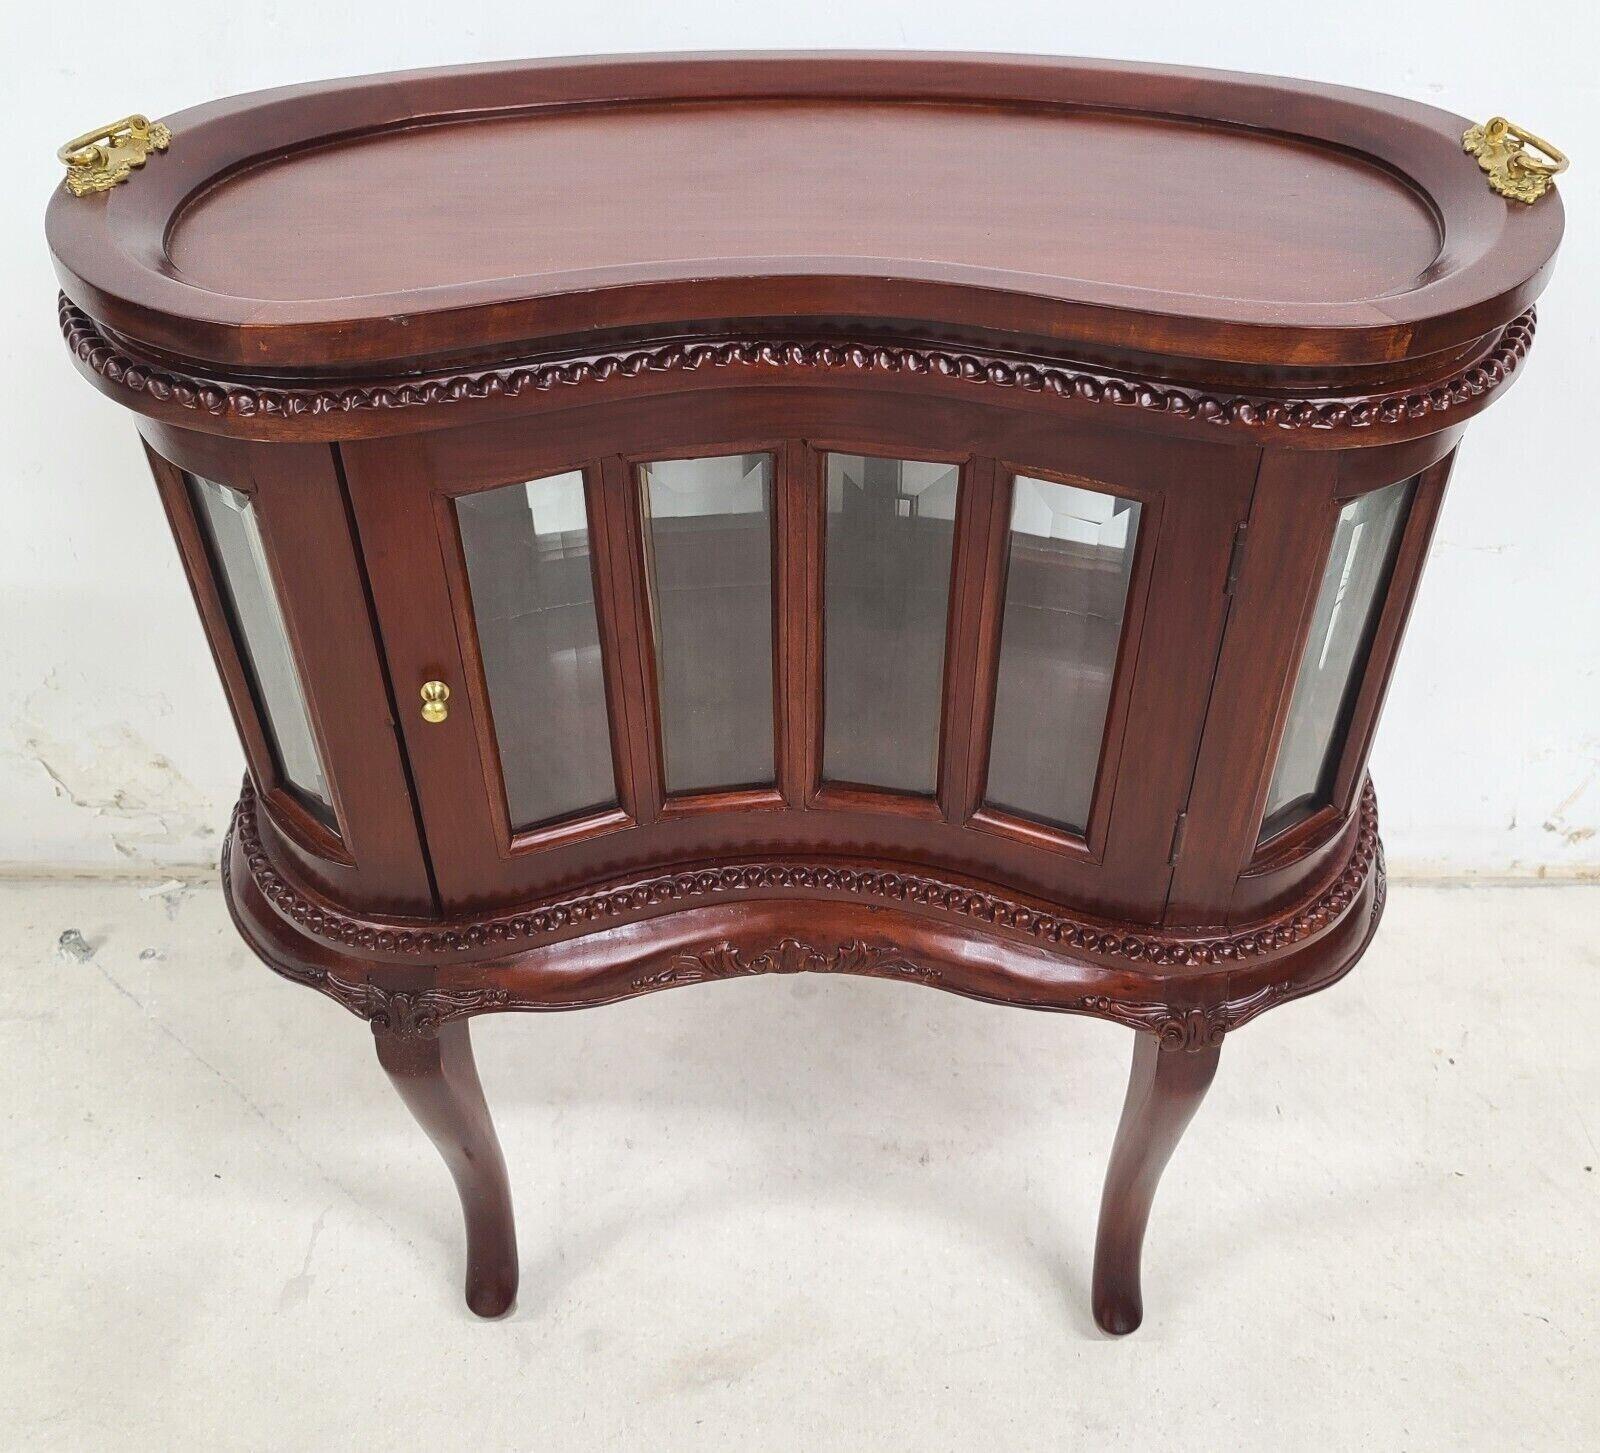 For FULL item description be sure to click on CONTINUE READING at the bottom of this listing.

Offering One Of Our Recent Palm Beach Estate Fine Furniture Acquisitions Of A 
Vintage Kidney Shaped Mahogany Dry Bar with Serving Tray
Featuring beveled